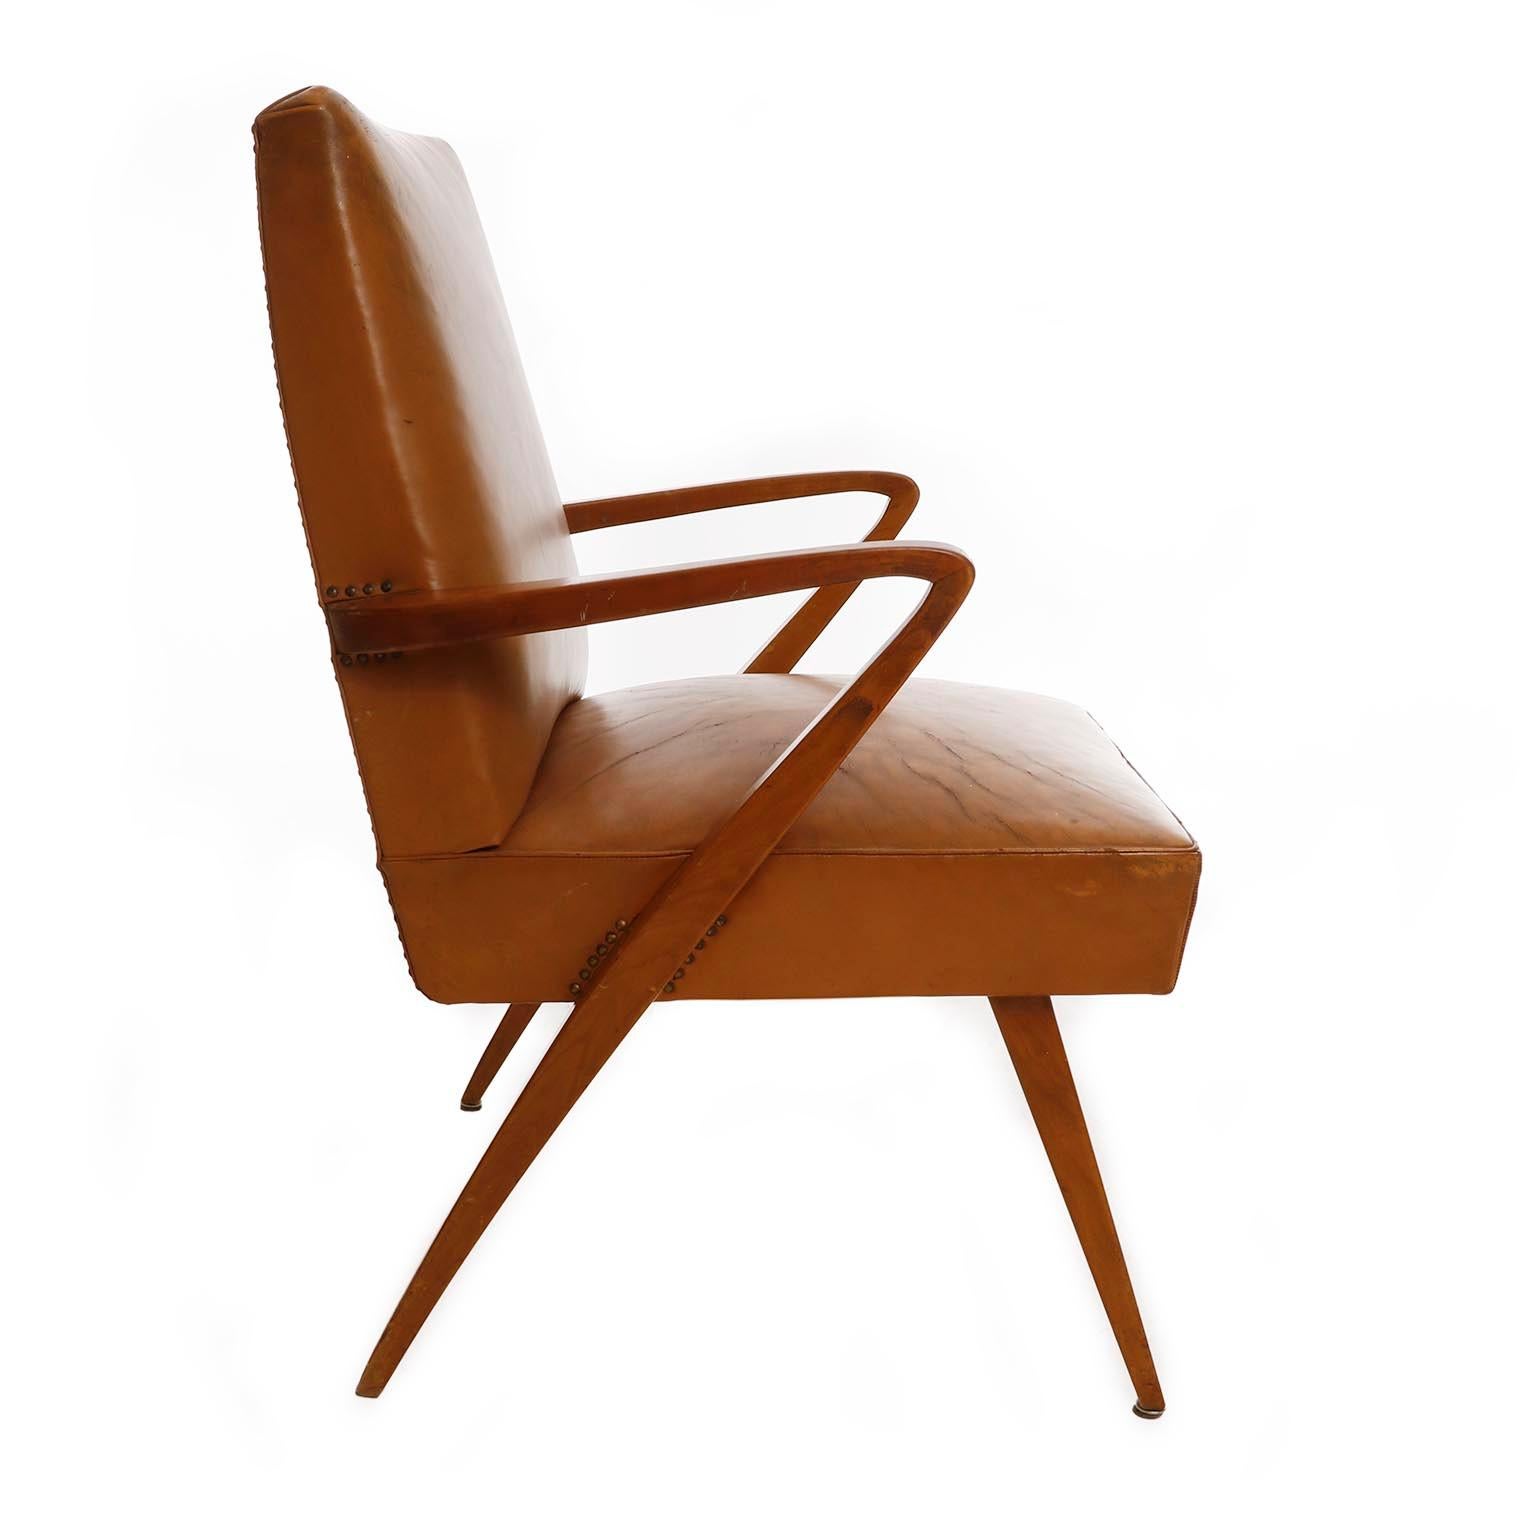 Mid-Century Modern Armchair, Patinated Cognac Leather Wood, Austria, 1950s For Sale